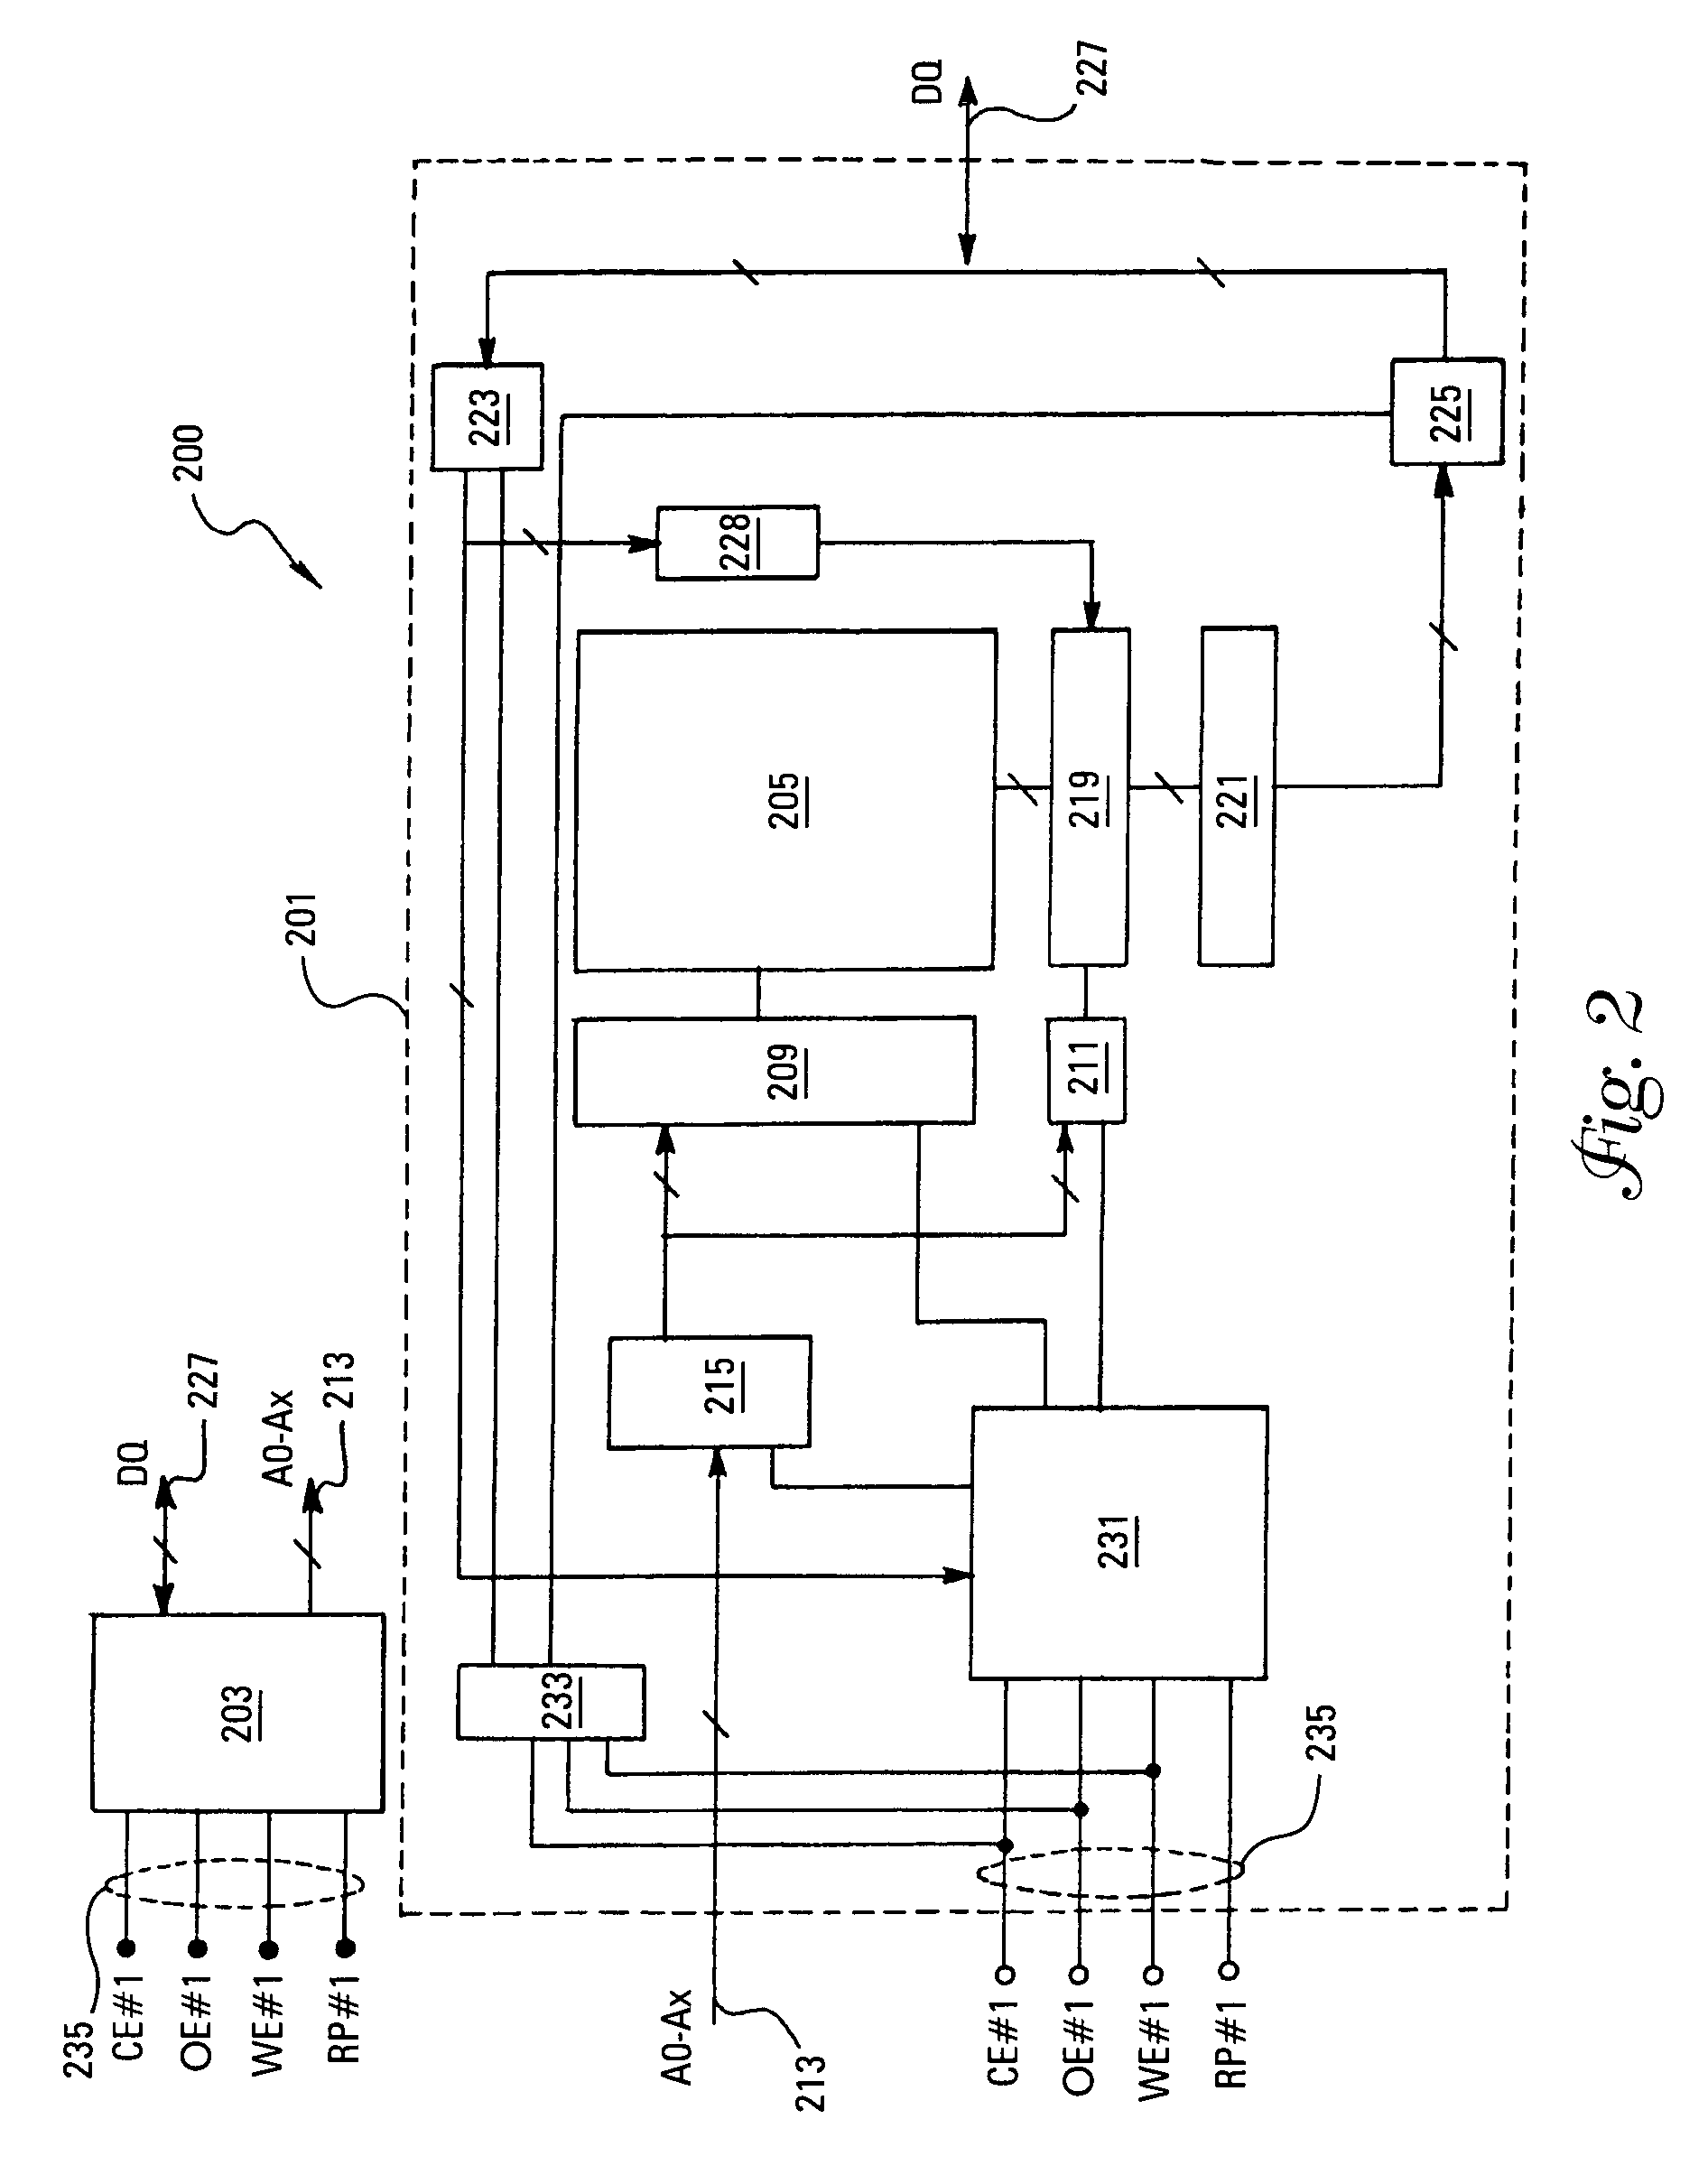 Flash cell fuse circuit